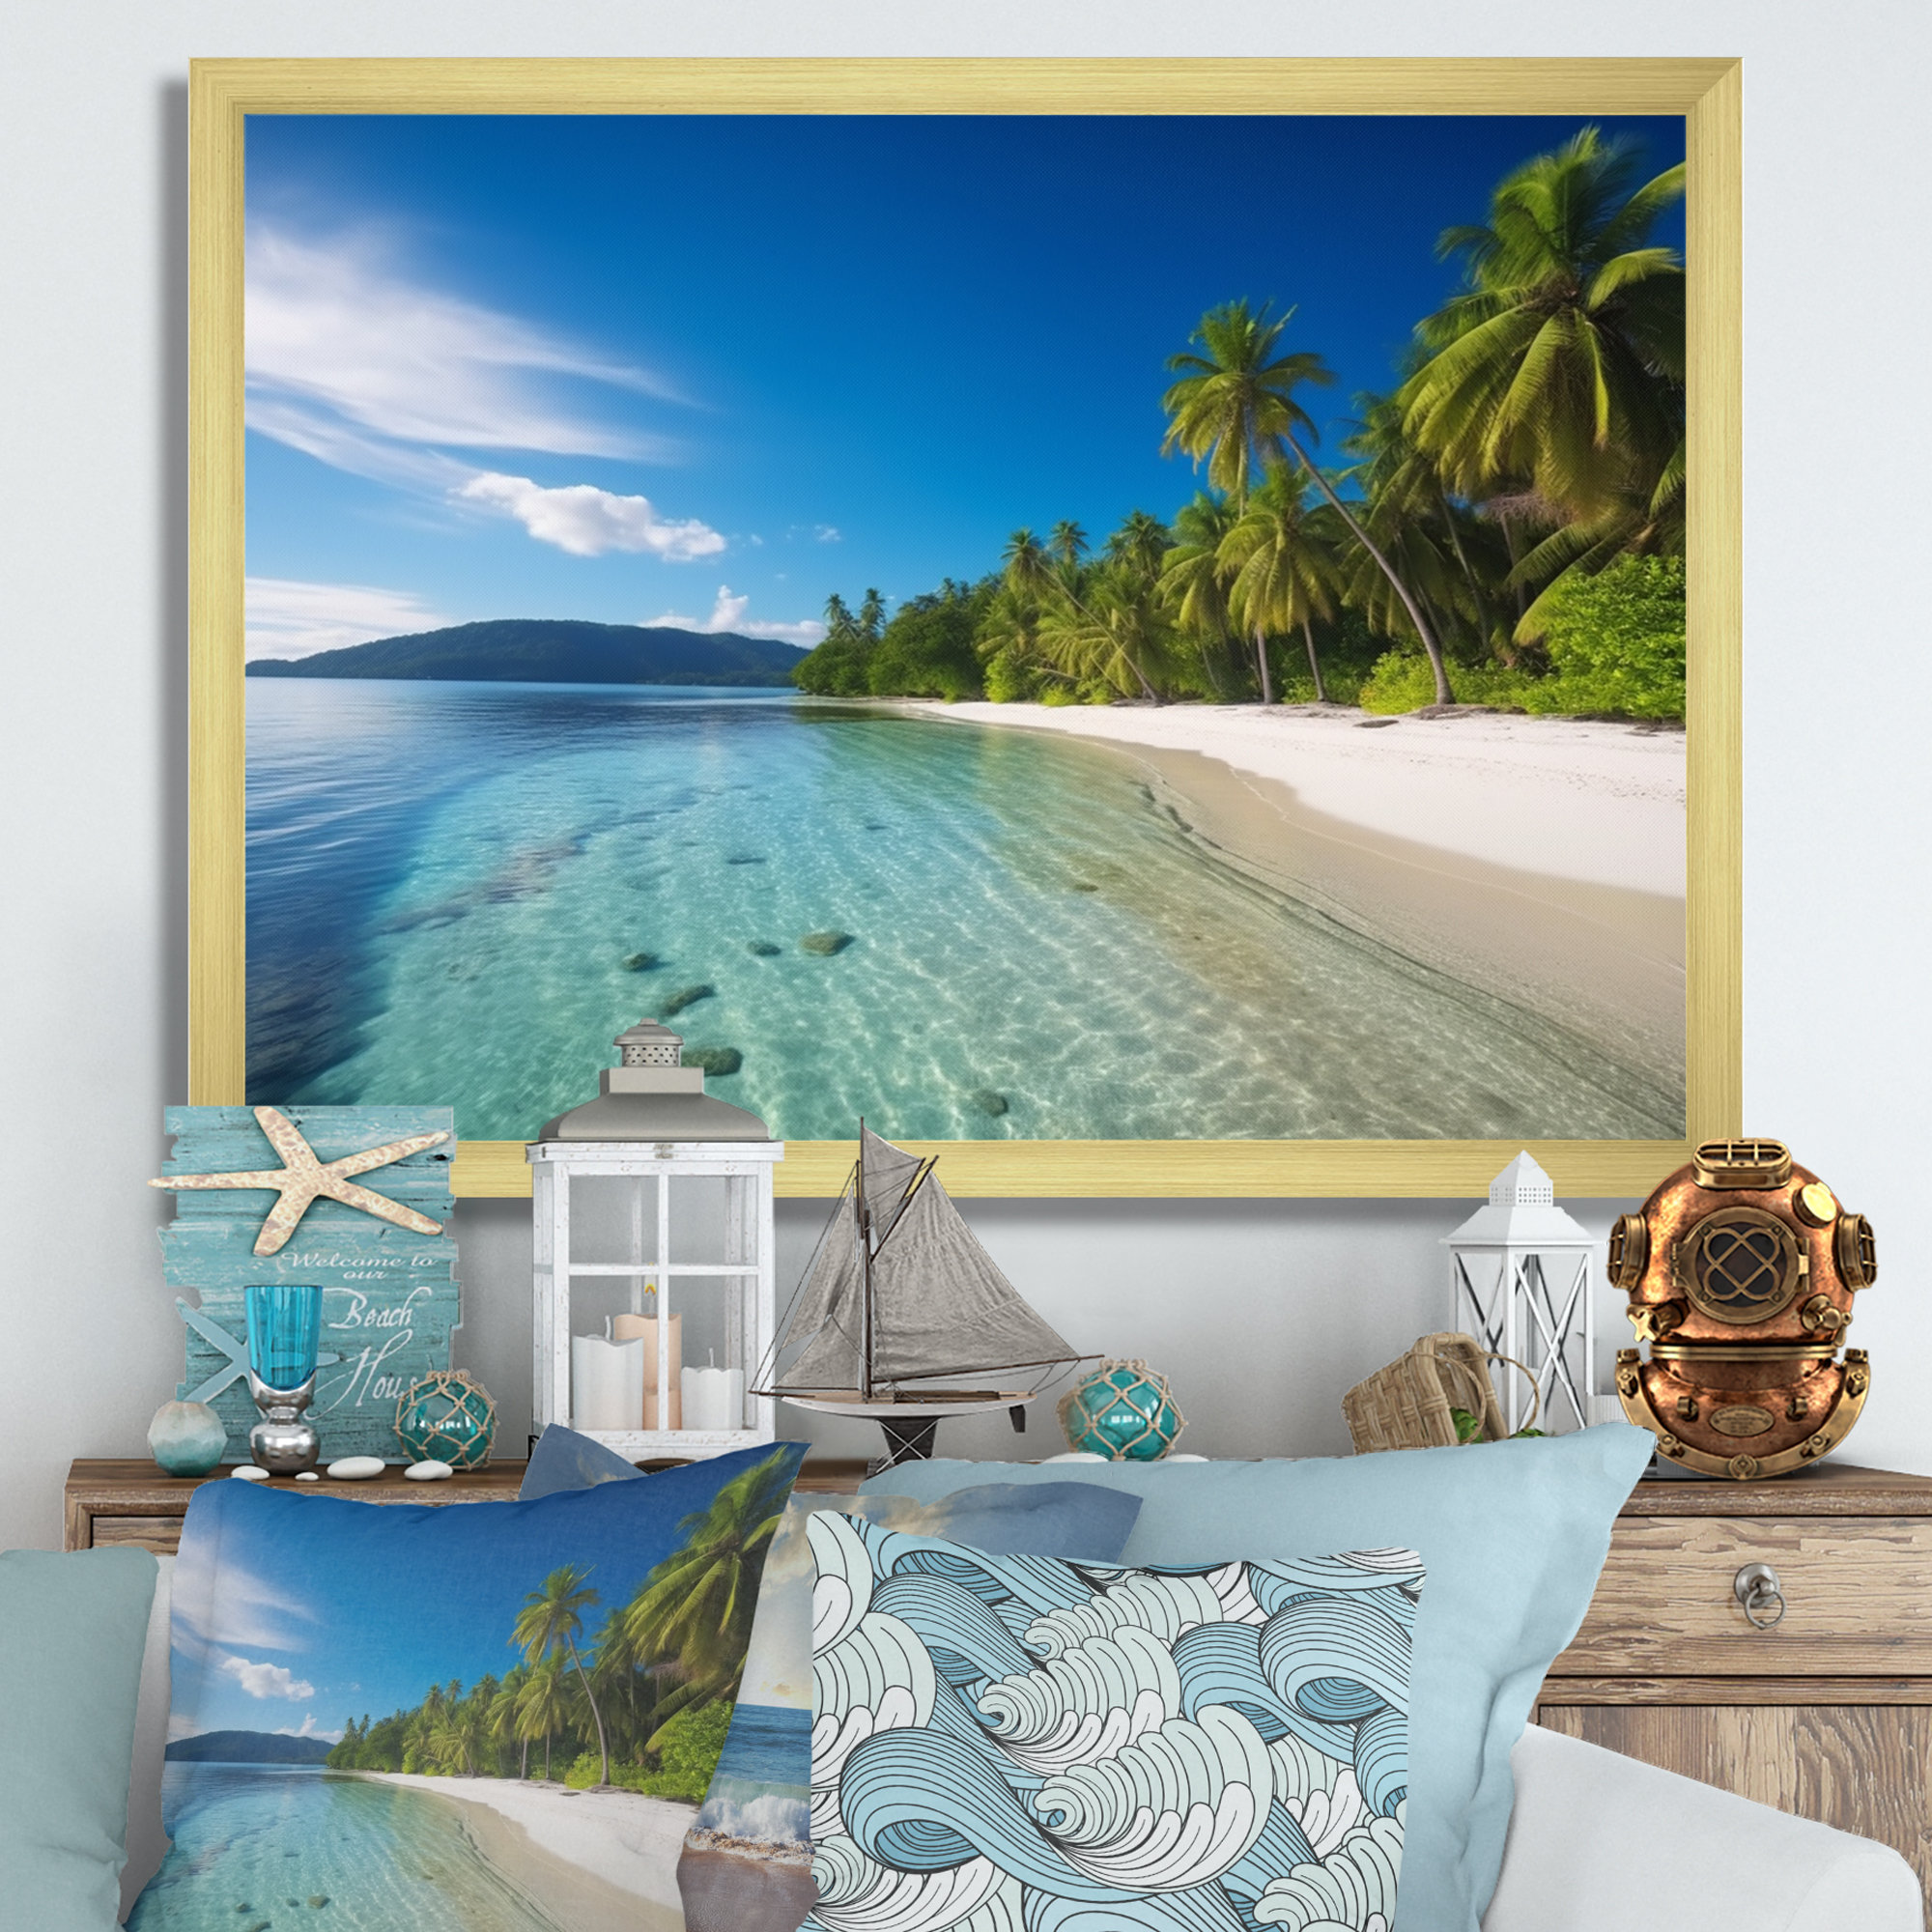 Ocean Blue Paradise On Canvas Print Dovecove Format: Gold Picture Framed, Size: 30 H x 40 W x 1.5 D